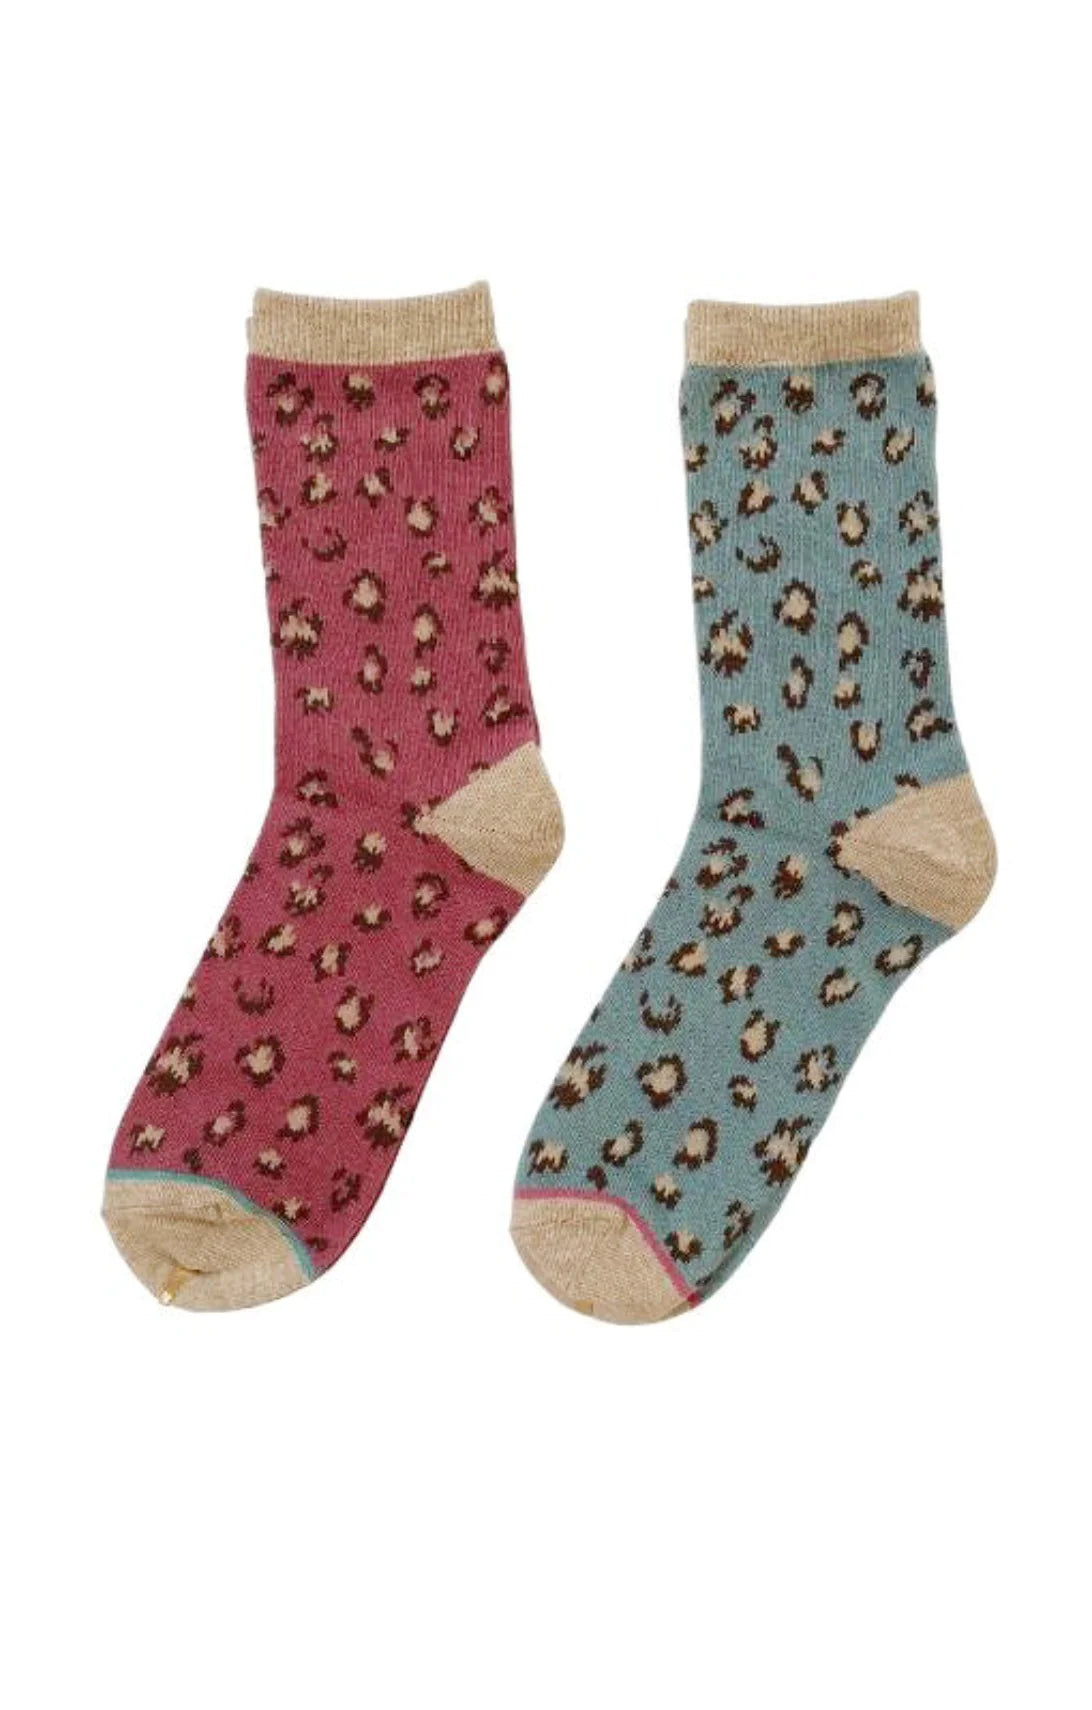 Sample photos of Tabbisocks' Leopard Animal Organic Cotton Crew Socks in MINT and Rose